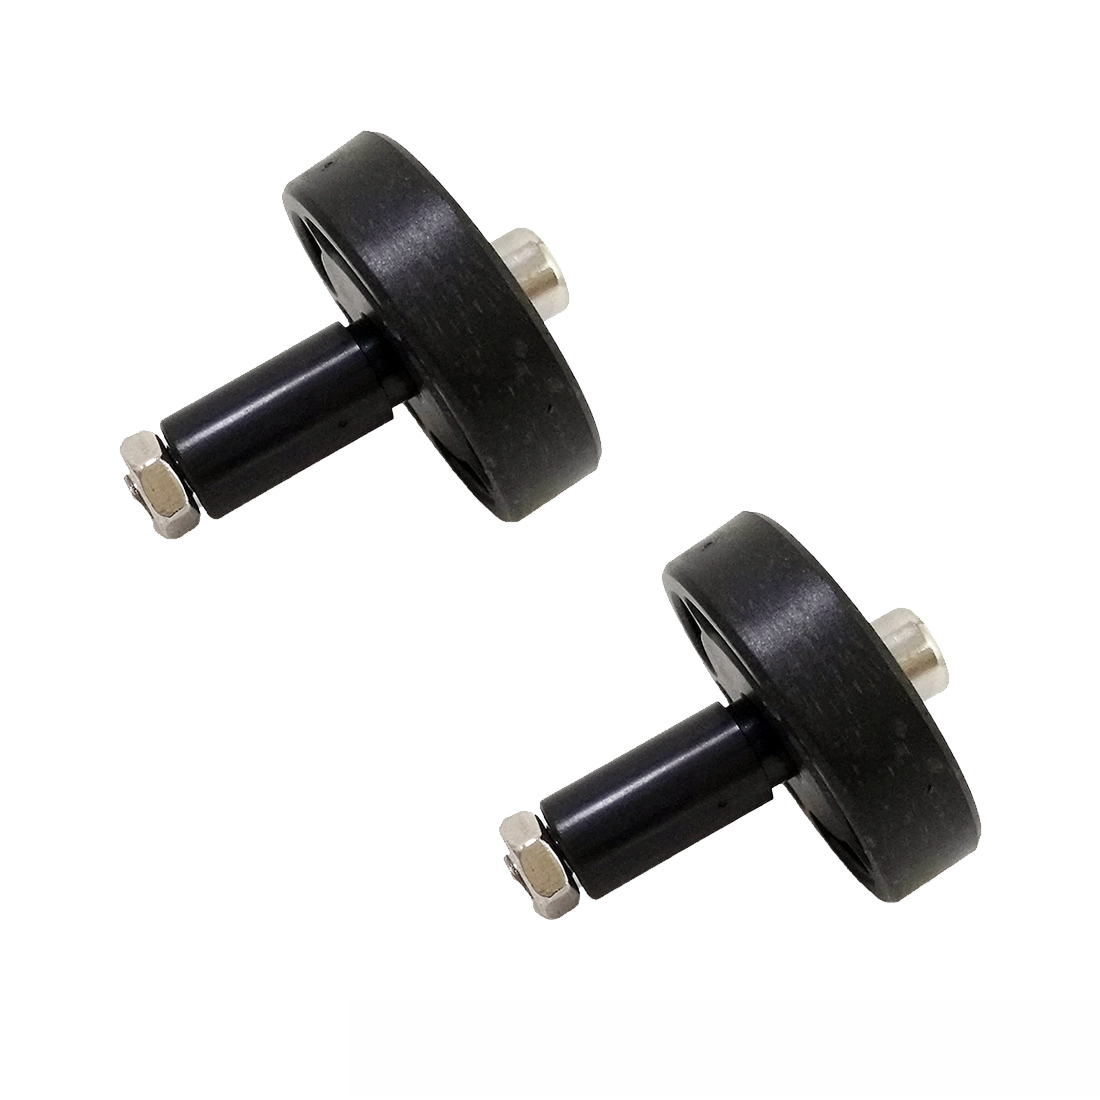 2Pcs Black Rubber Bearing Wheels for Chassis Tank Car 9